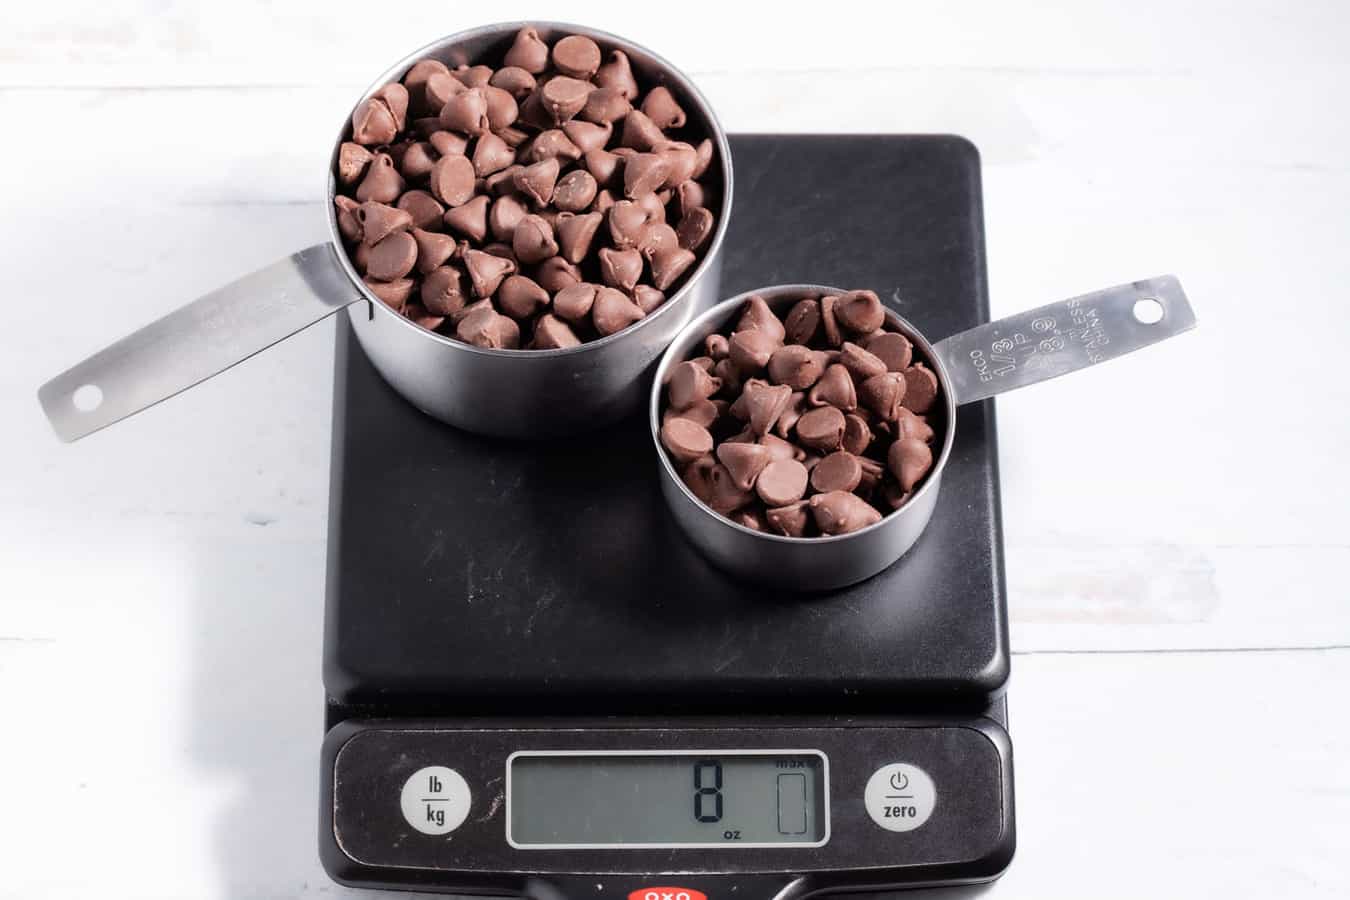 1 1/3 cups of chocolate chips on a kitchen scale